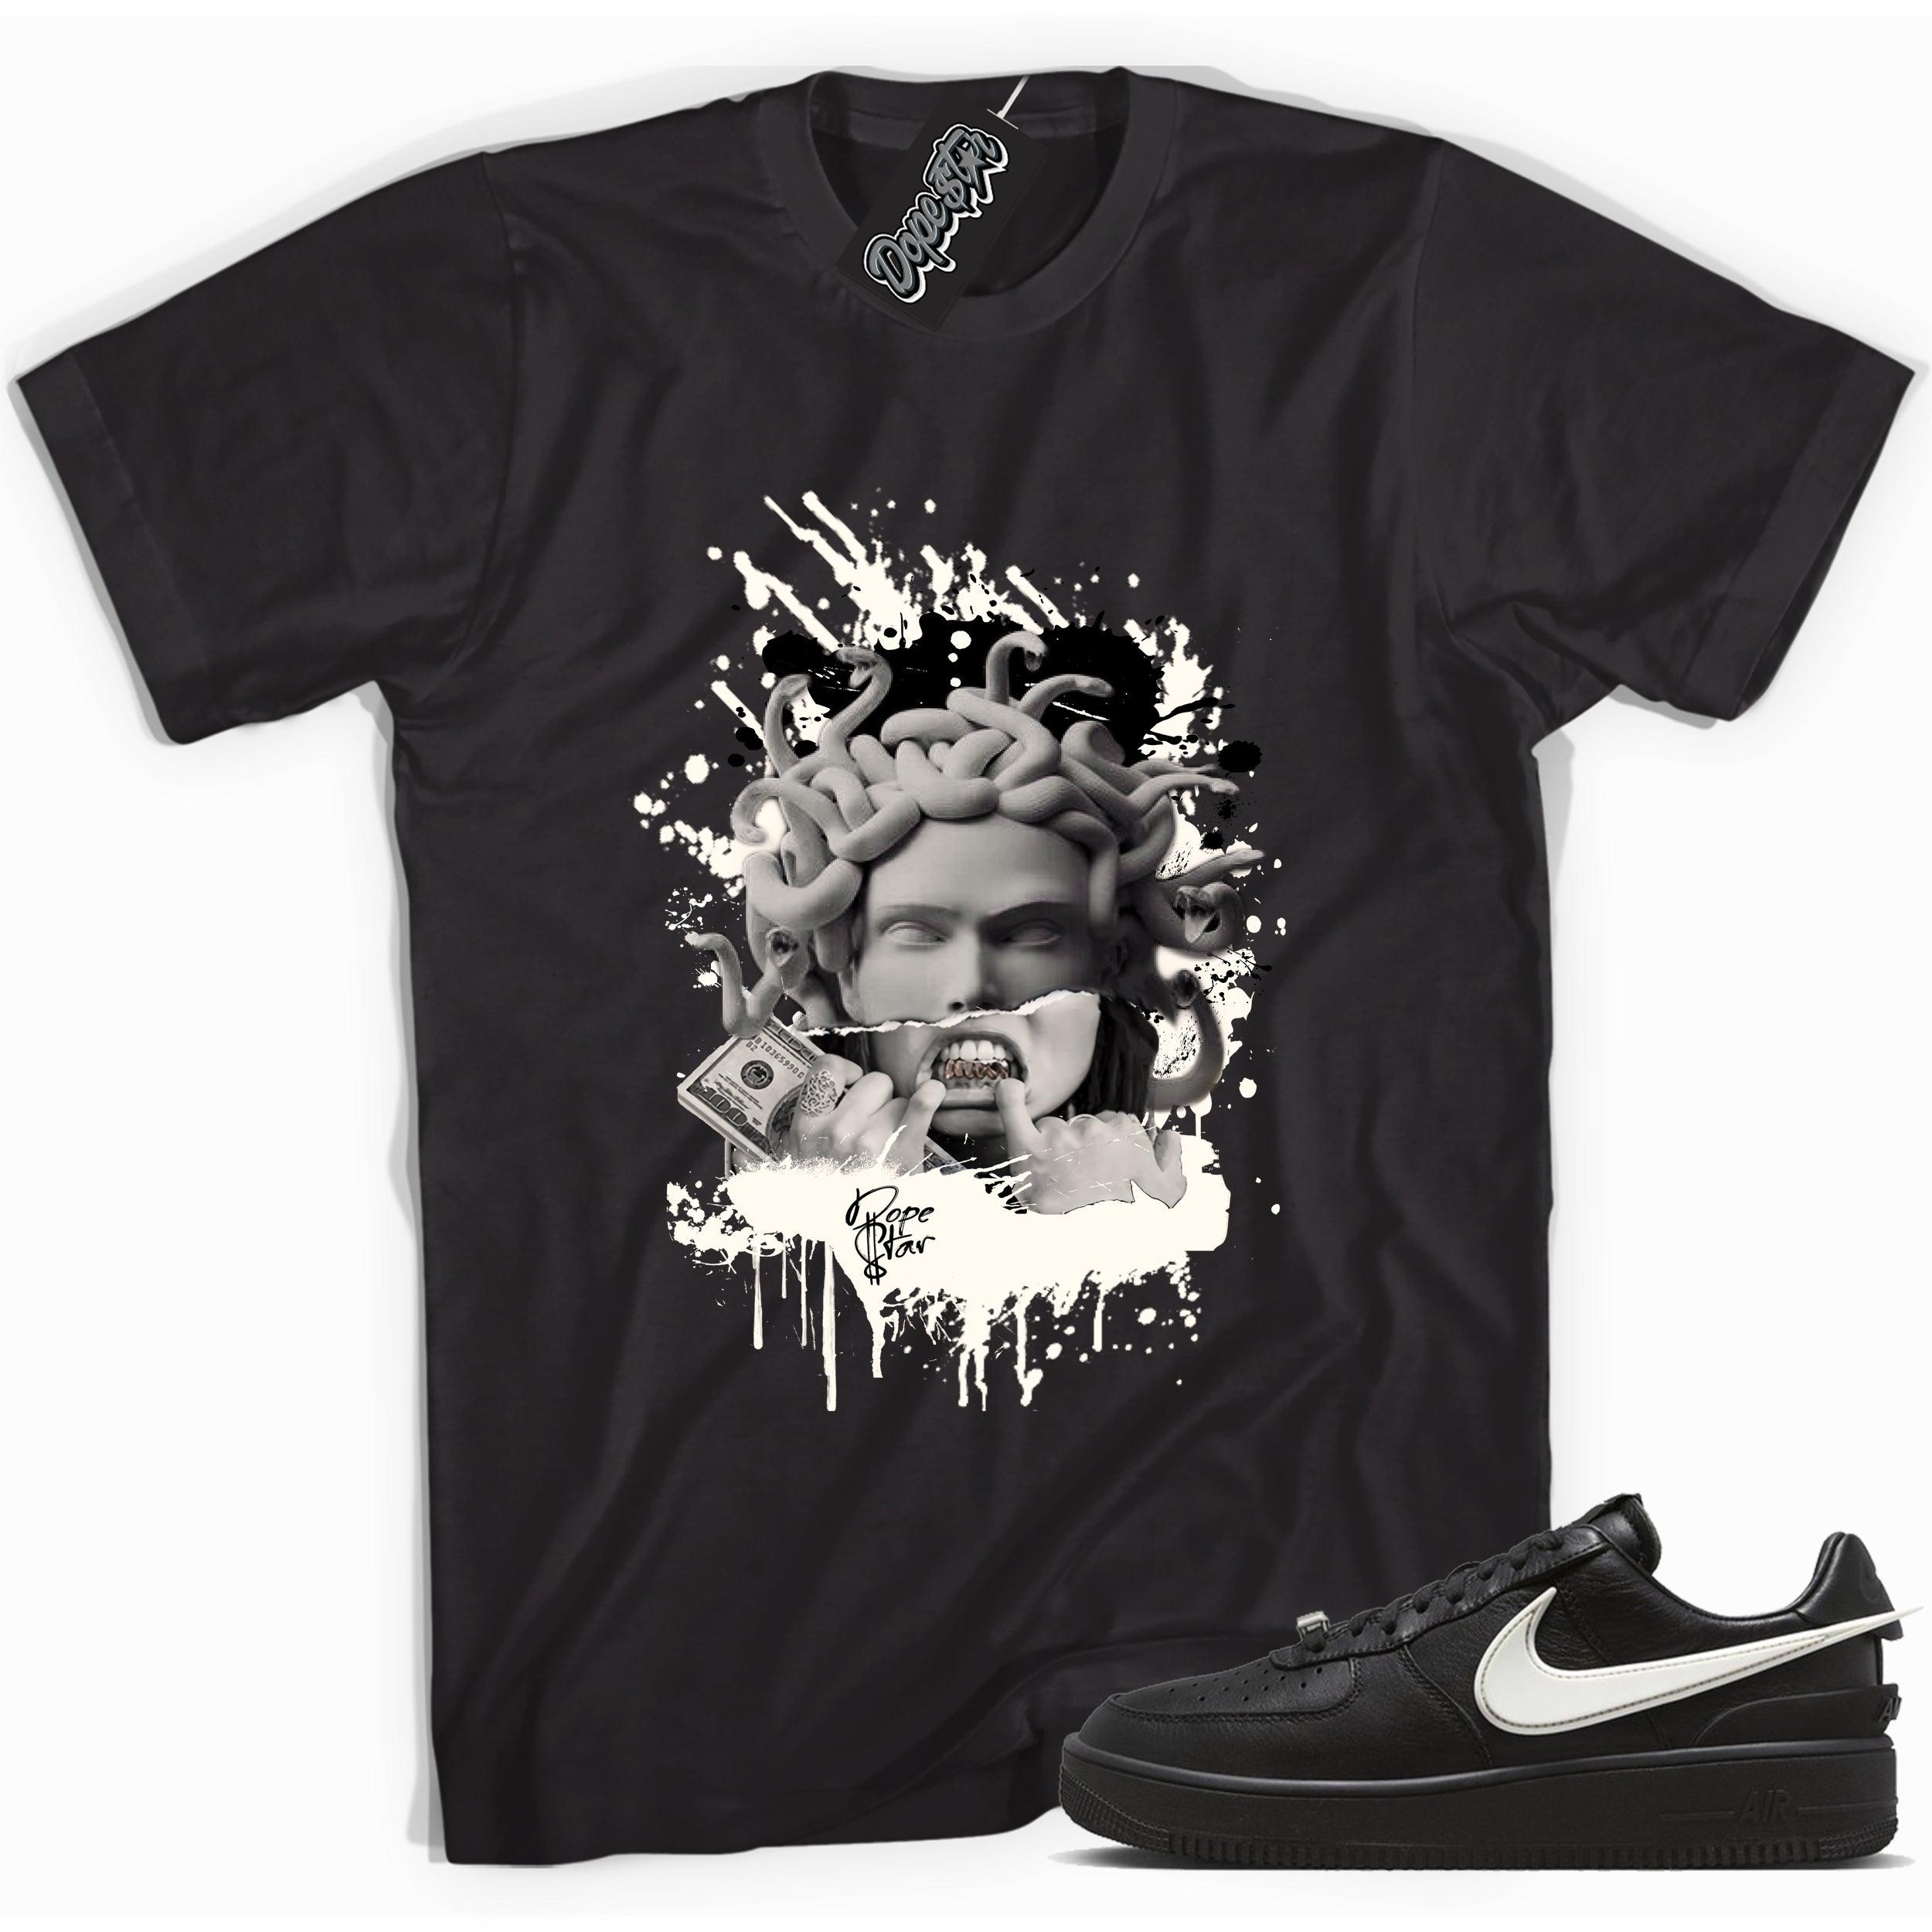 Cool black graphic tee with 'medusa' print, that perfectly matches Nike Air Force 1 Low SP Ambush Phantom sneakers.